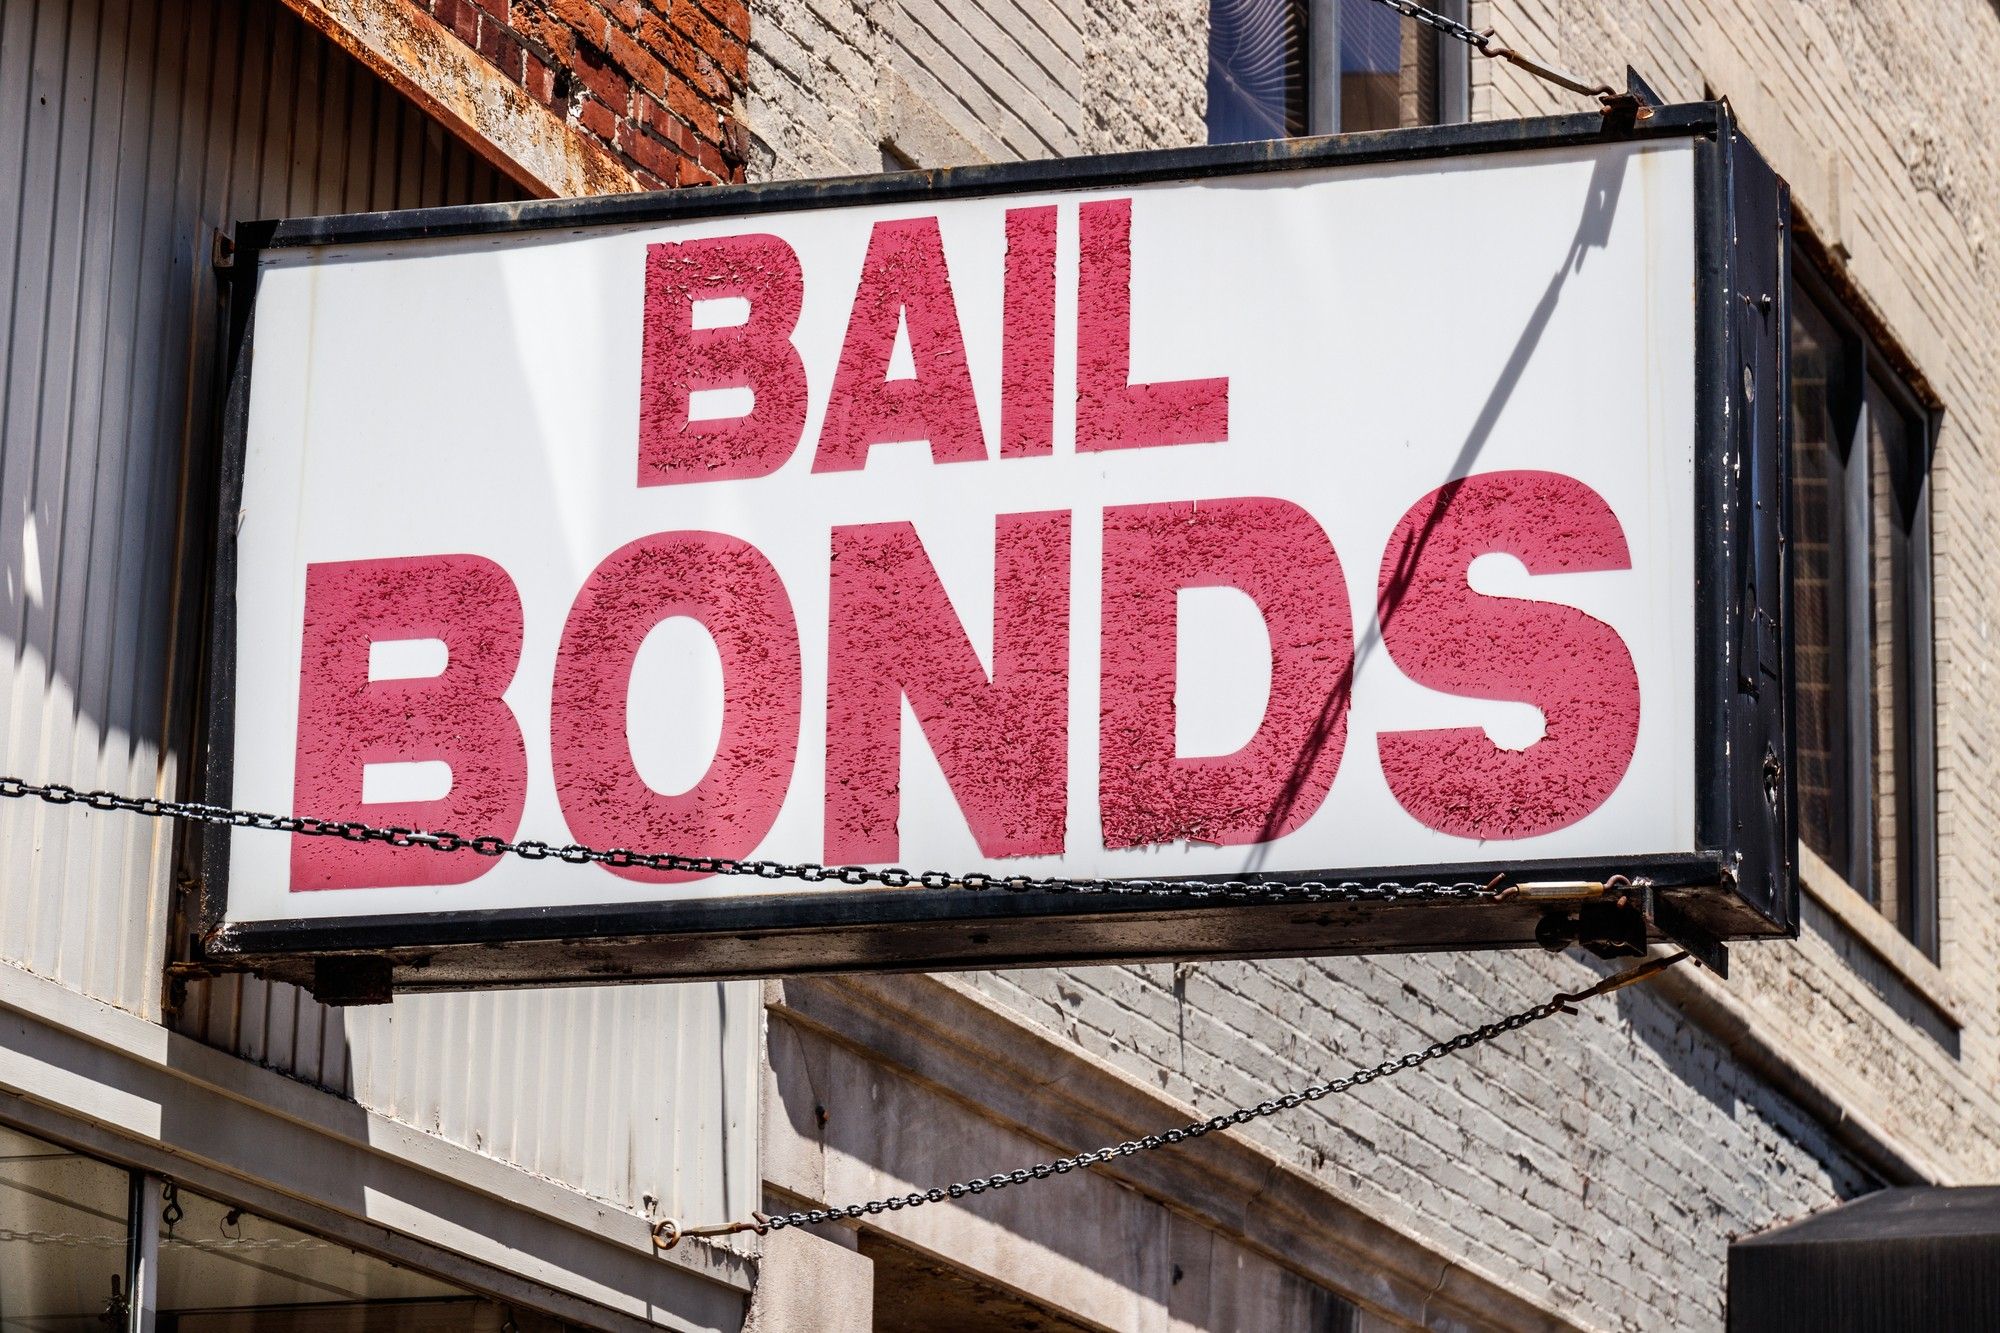 Bail bonds agency, BBBB, is facing a class action lawsuit over pressure tactics.